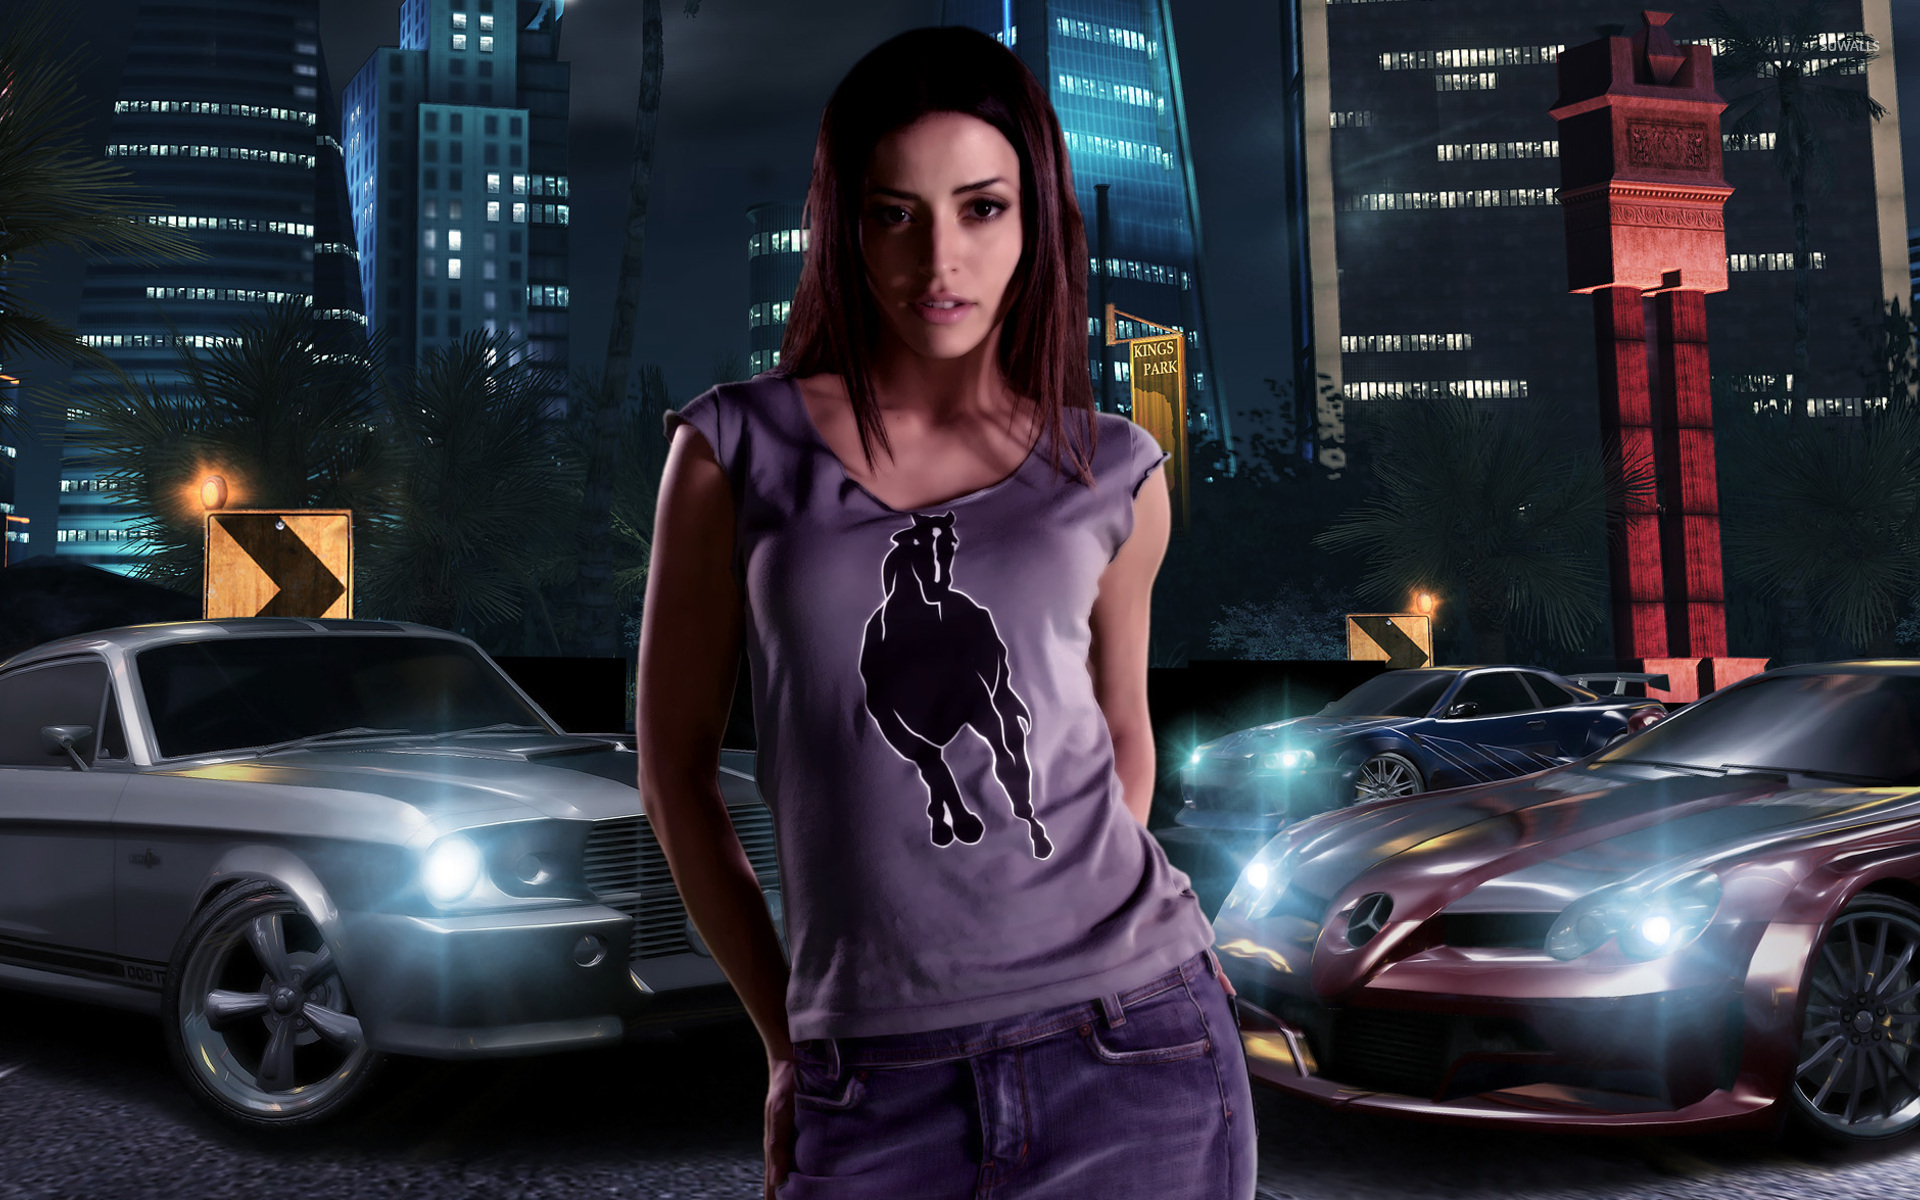 Need For Speed Carbon Wallpaper Game Wallpapers 1104 Images, Photos, Reviews